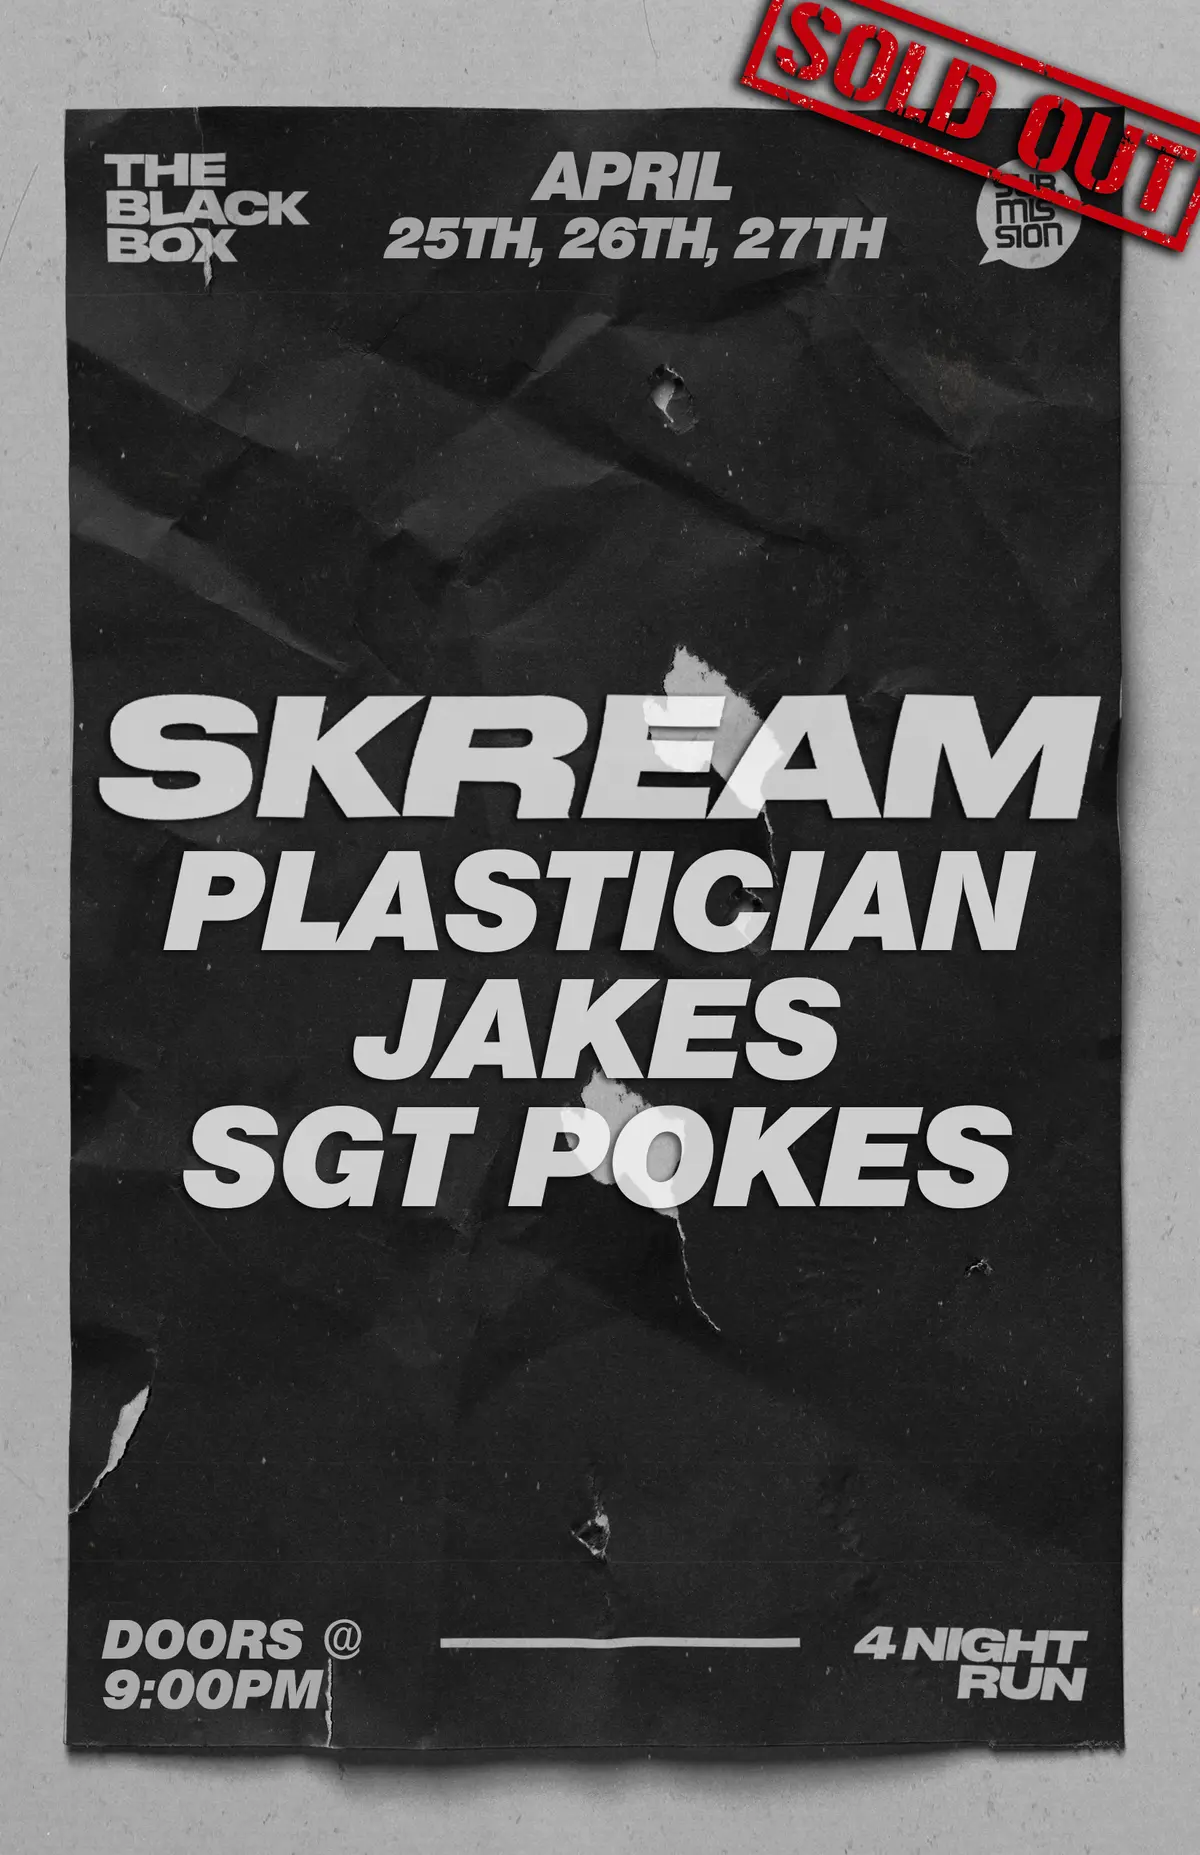 Sub.mission presents: Skream x Special Guests x SGT Pokes (21+) *SOLD OUT*